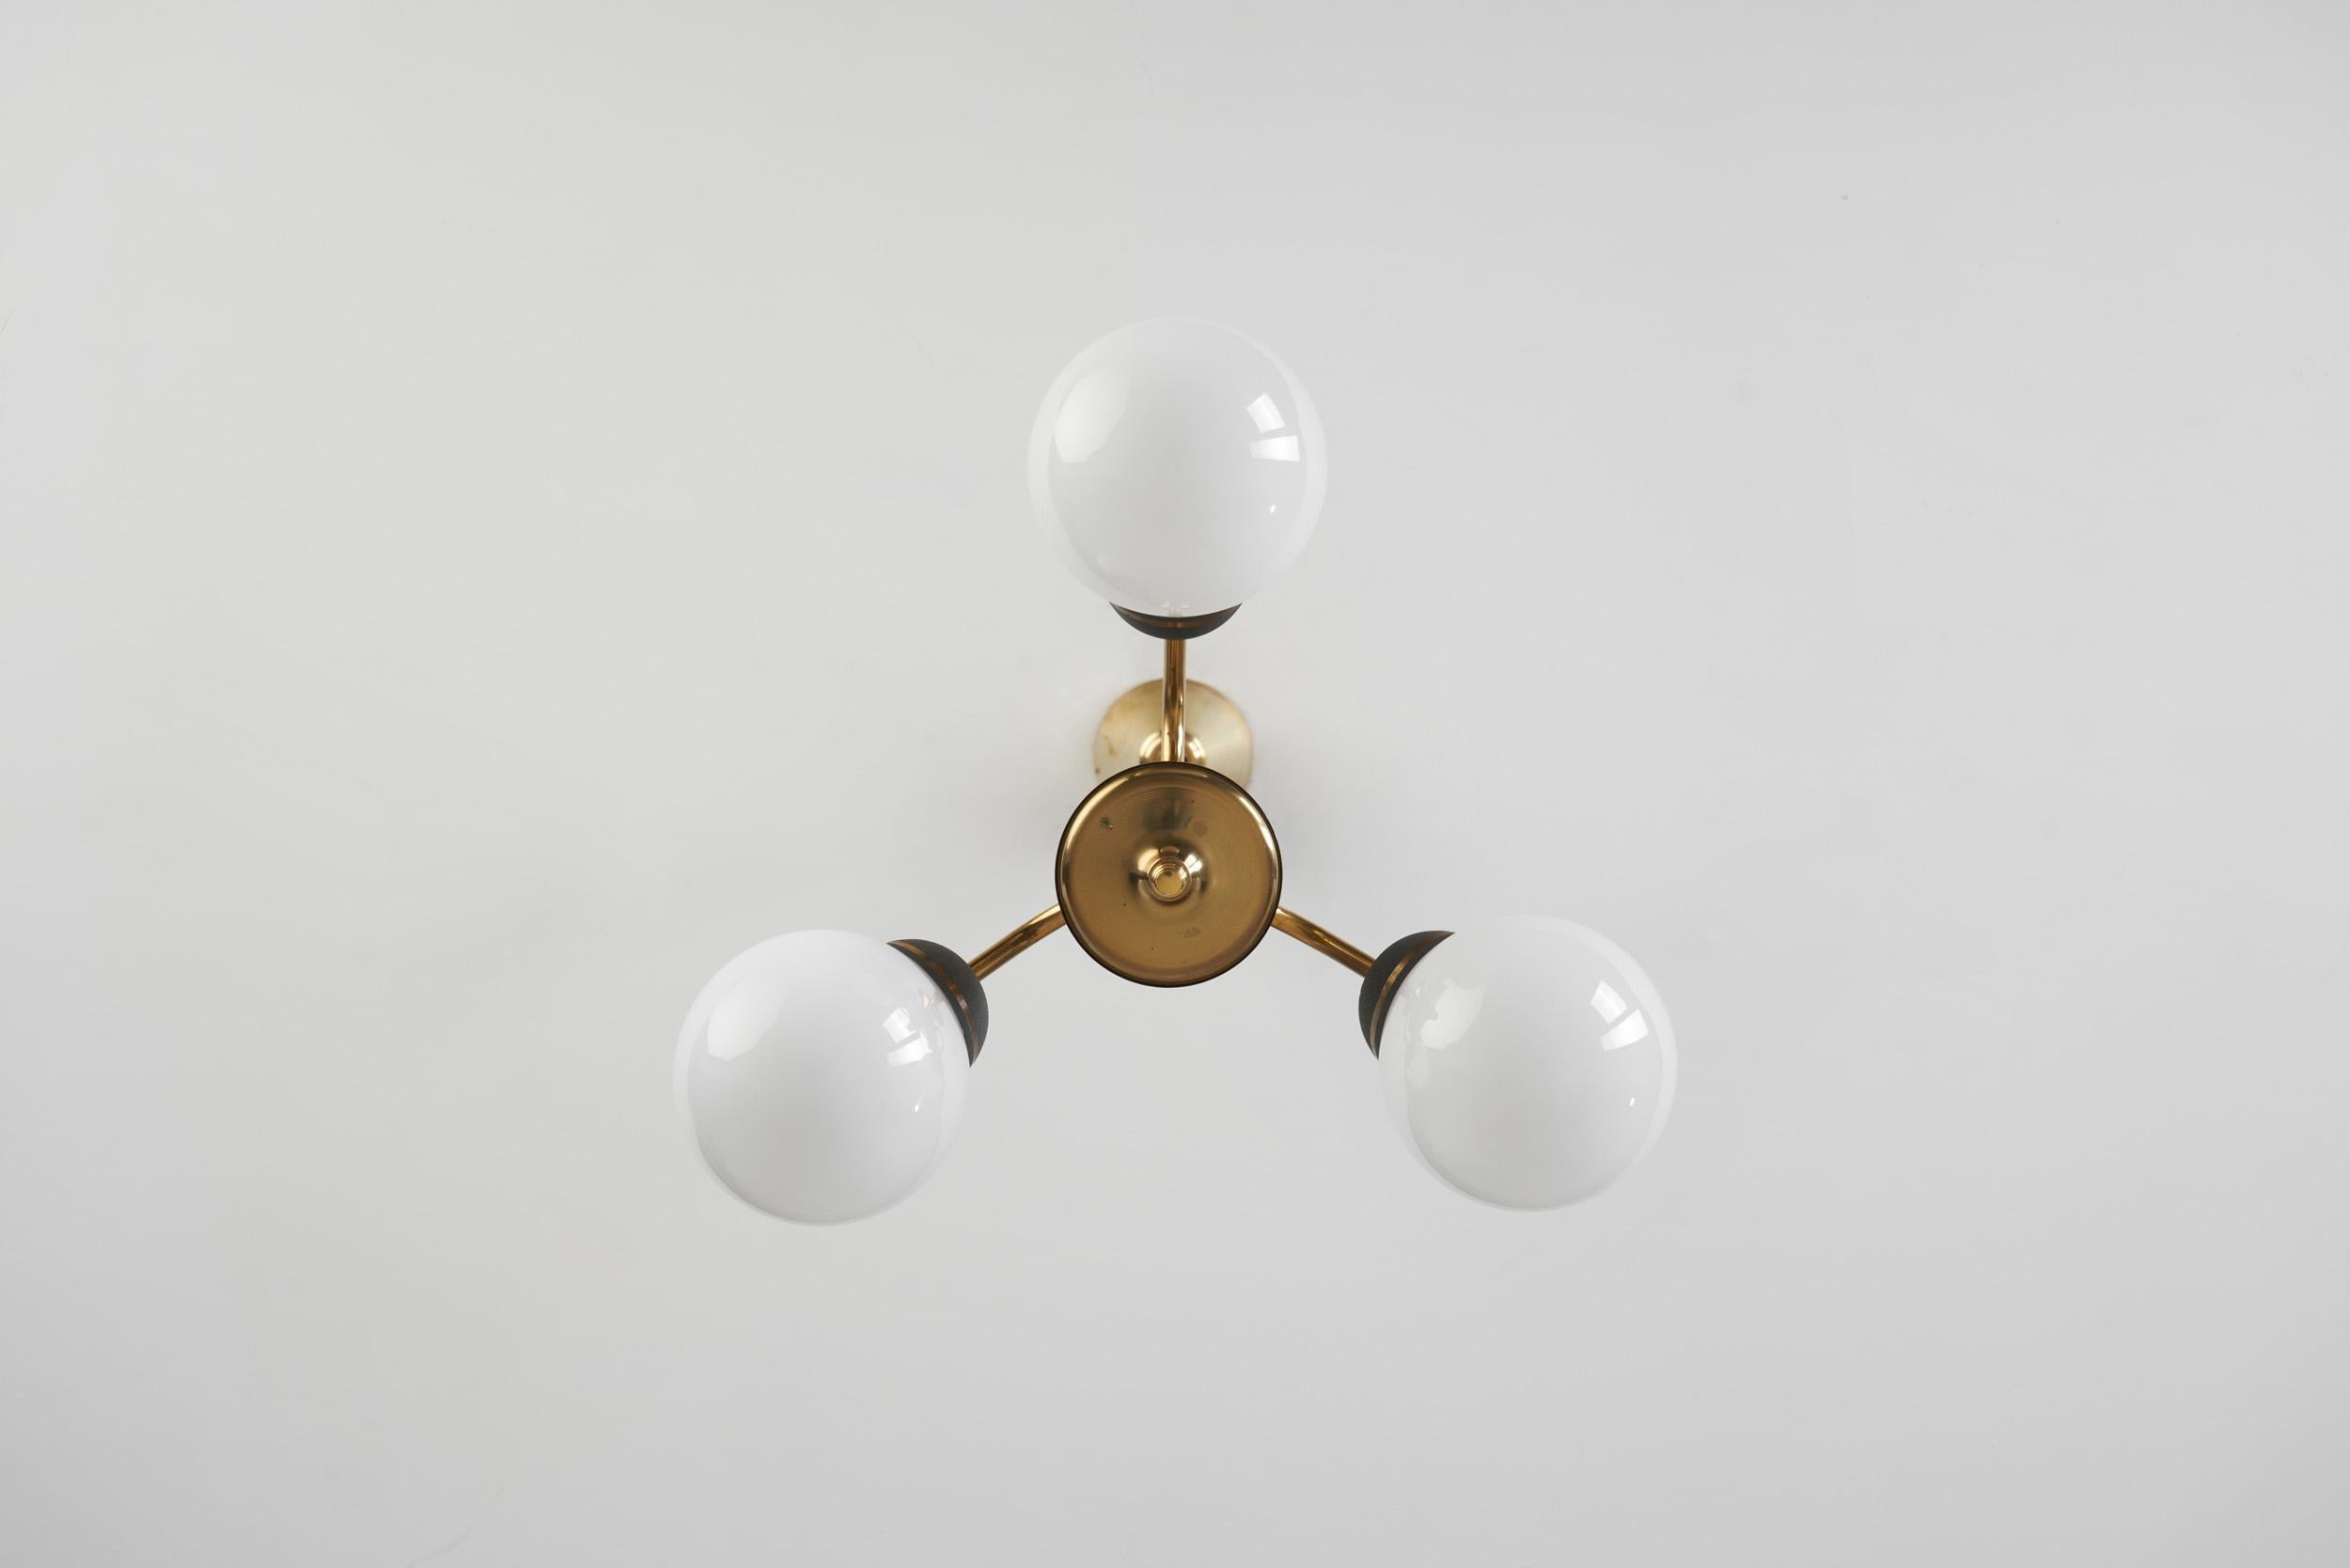 Brass Three-Armed Ceiling Lamp with Opal Glass Shades, Scandinavia 1950s For Sale 9